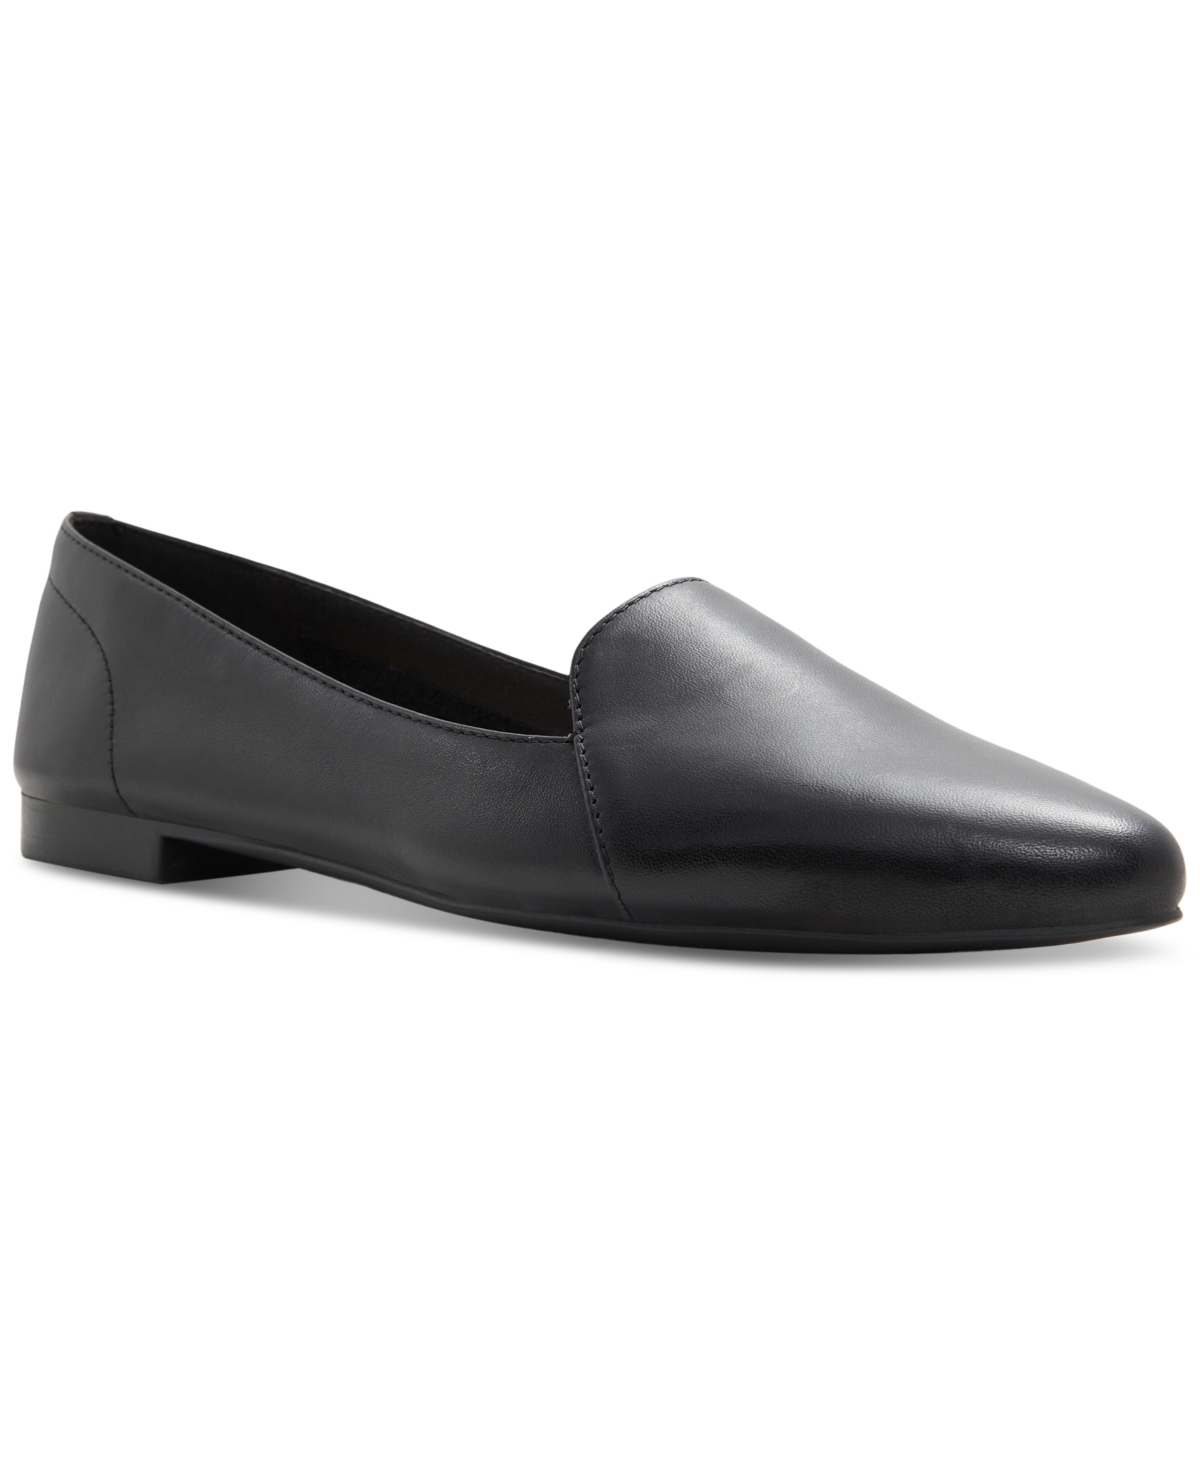 Aldo Women's Winifred Casual Slip-on Loafer Flats In Black Smooth